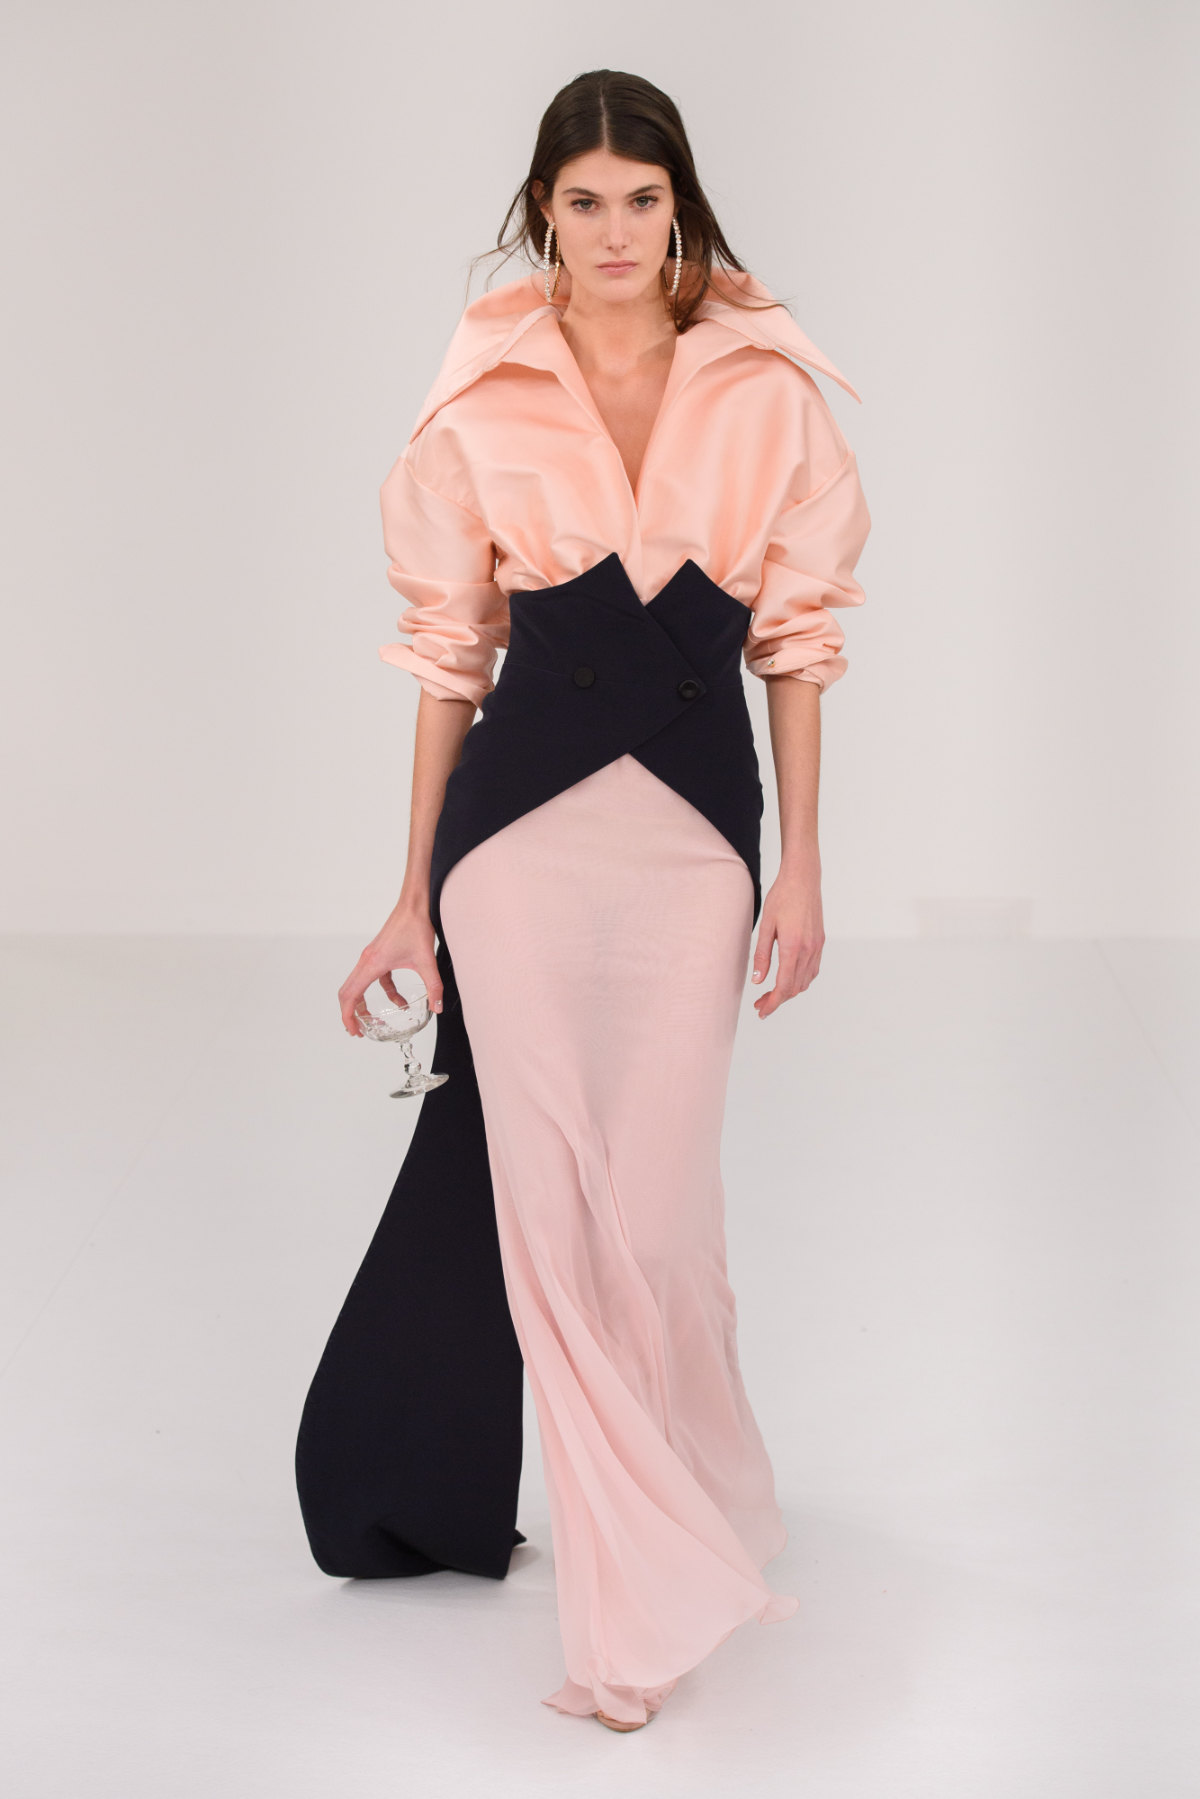 Alexis Mabille Presents Its New Haute Couture Fall-Winter 2023/2024 Collection: Mondaines